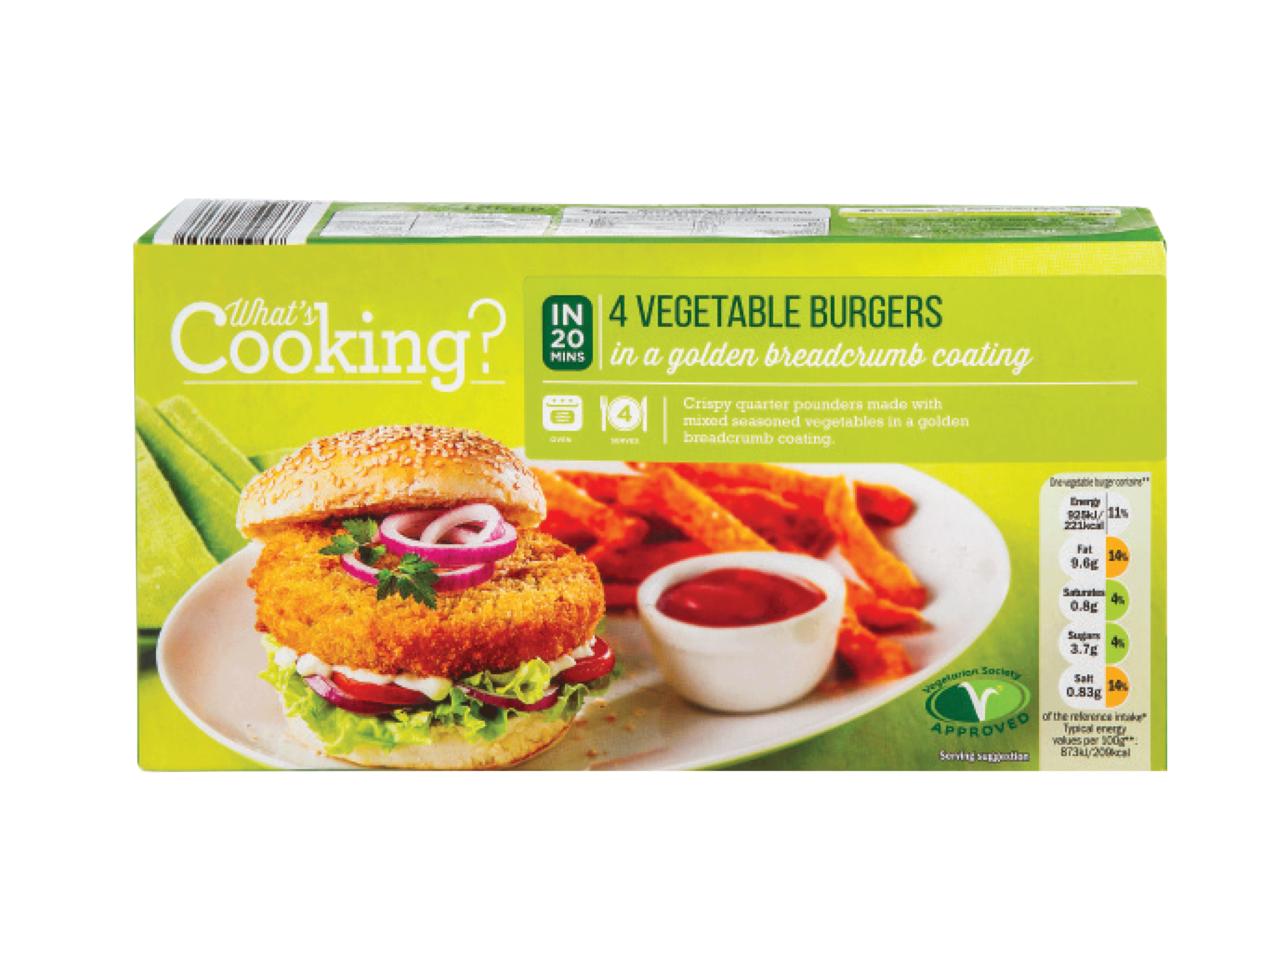 WHAT'S COOKING? 4 Vegetable Burgers